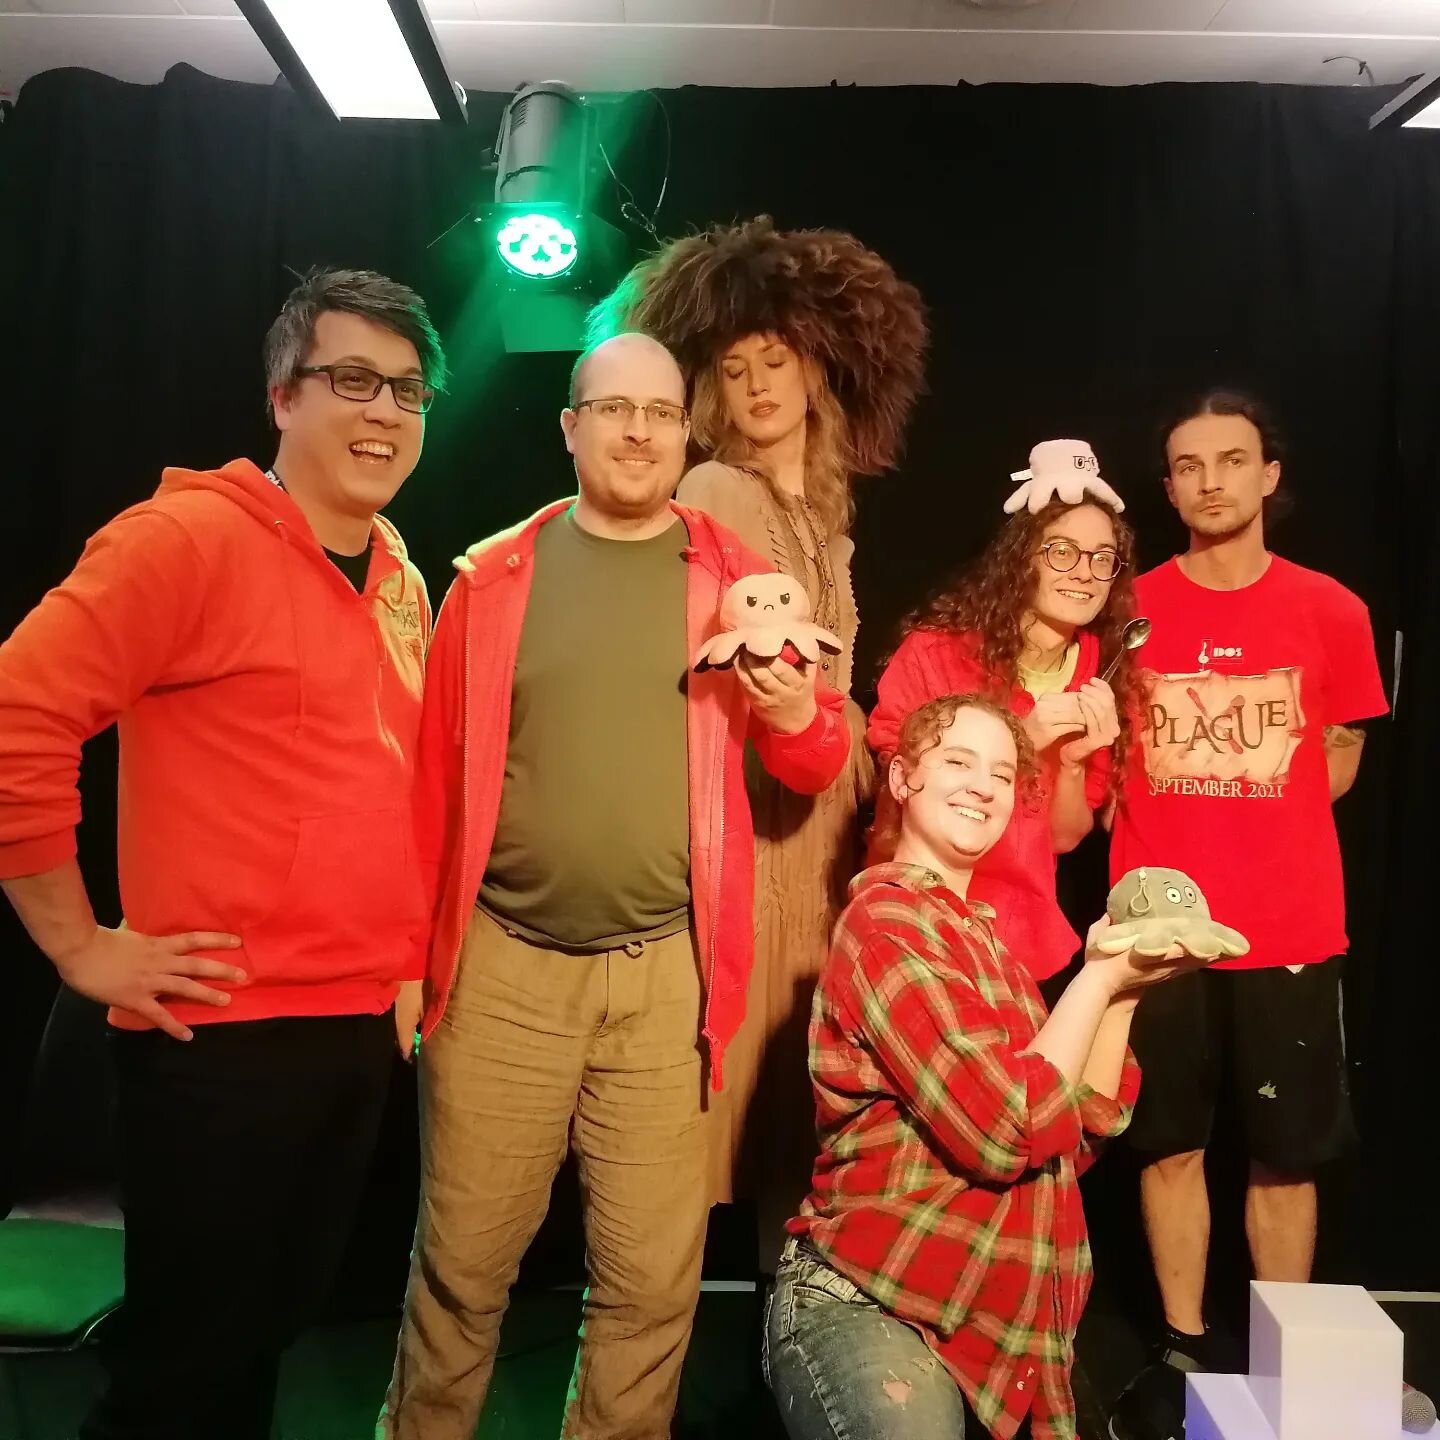 Our Chaotic Neutral hosts were delighted to see the Plague cast @sidgwickandsanders at our show last night!  They matched Knifey's colour scheme perfectly 🧡🐙🧡 #edfringe #edfringe2022